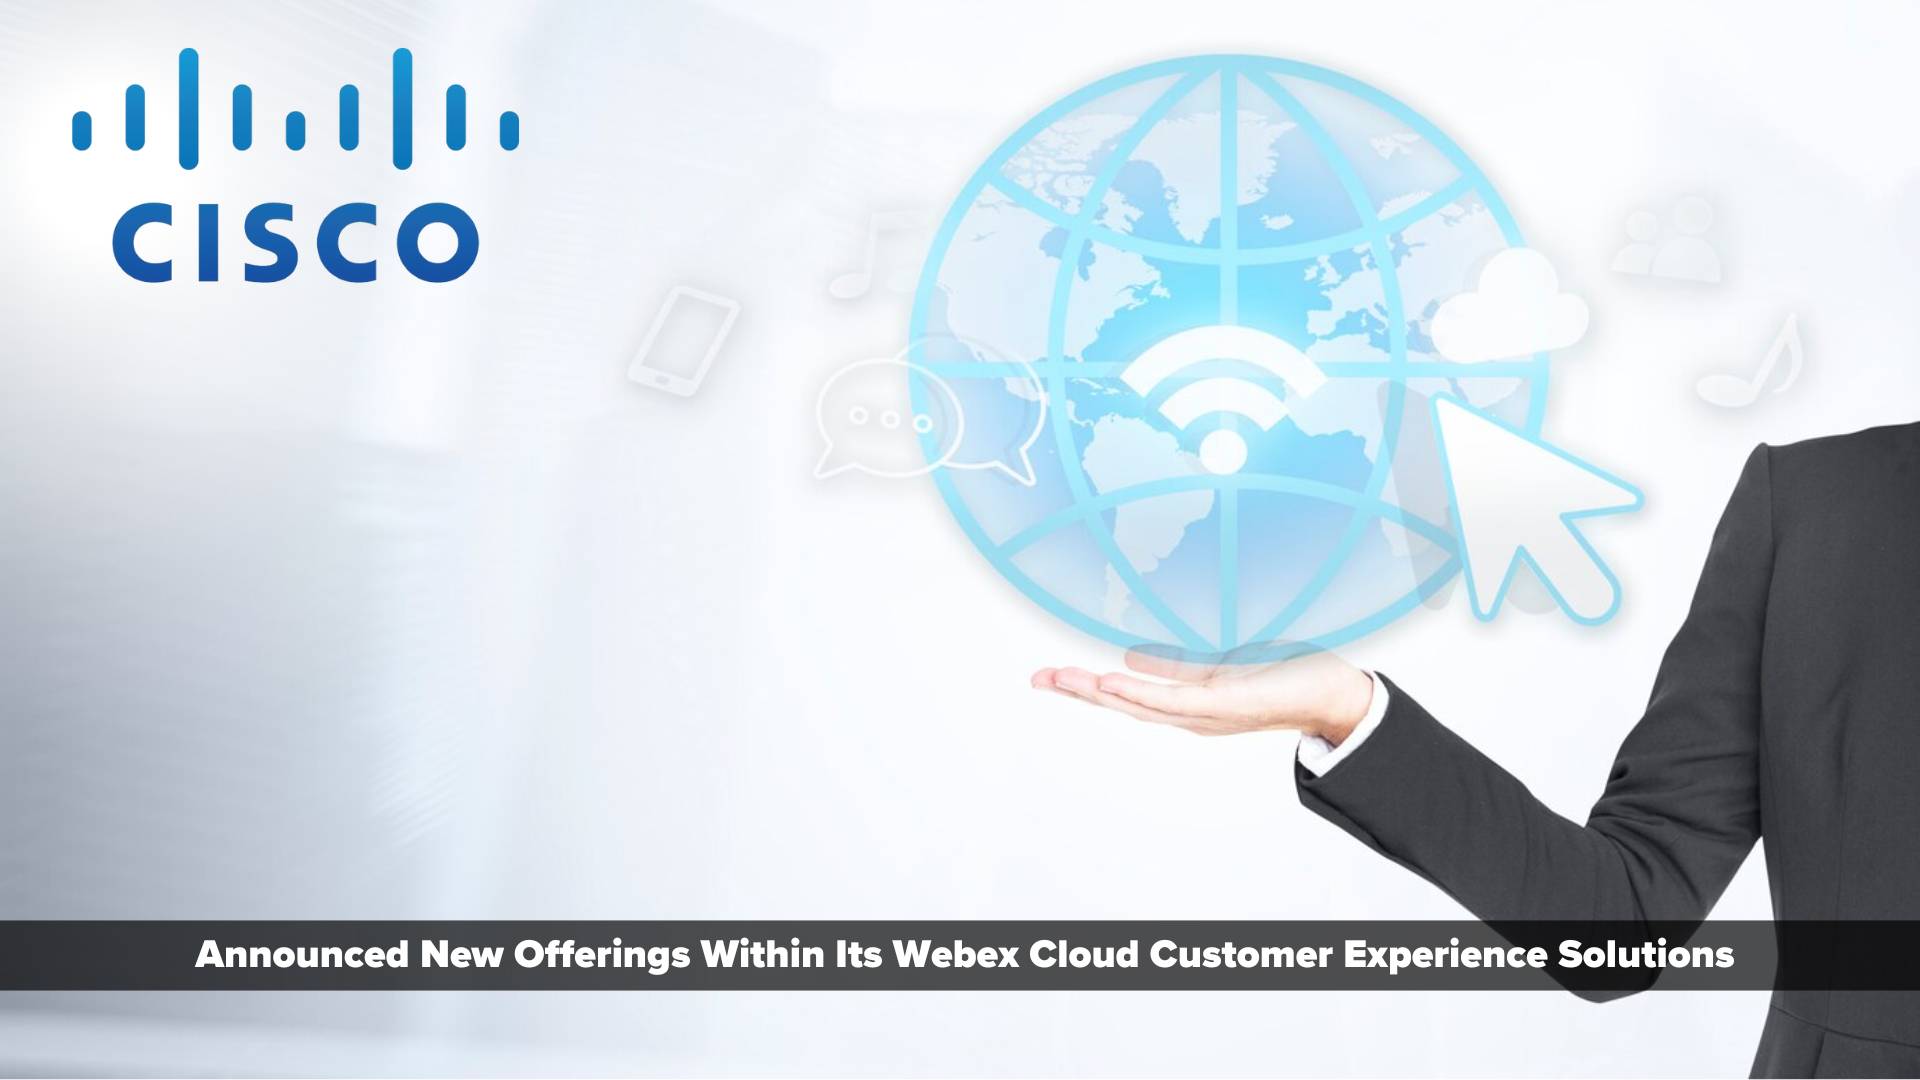 Cisco Furthers Customer Experience Momentum with New Offerings That Extend Customer Value